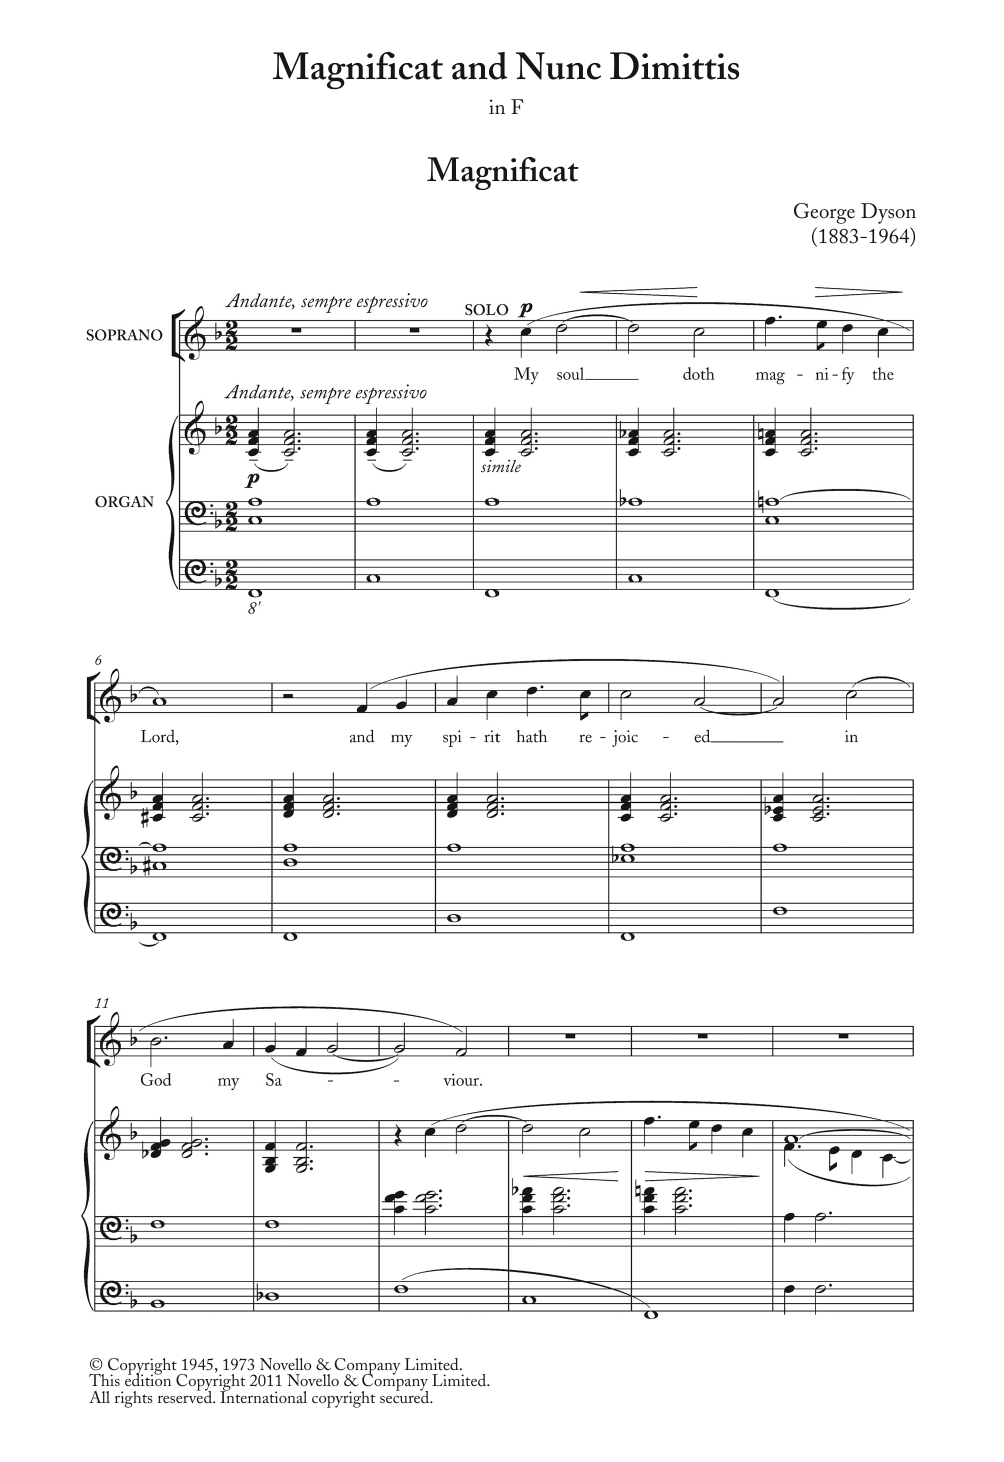 Download George Dyson Magnificat And Nunc Dimittis In F Sheet Music